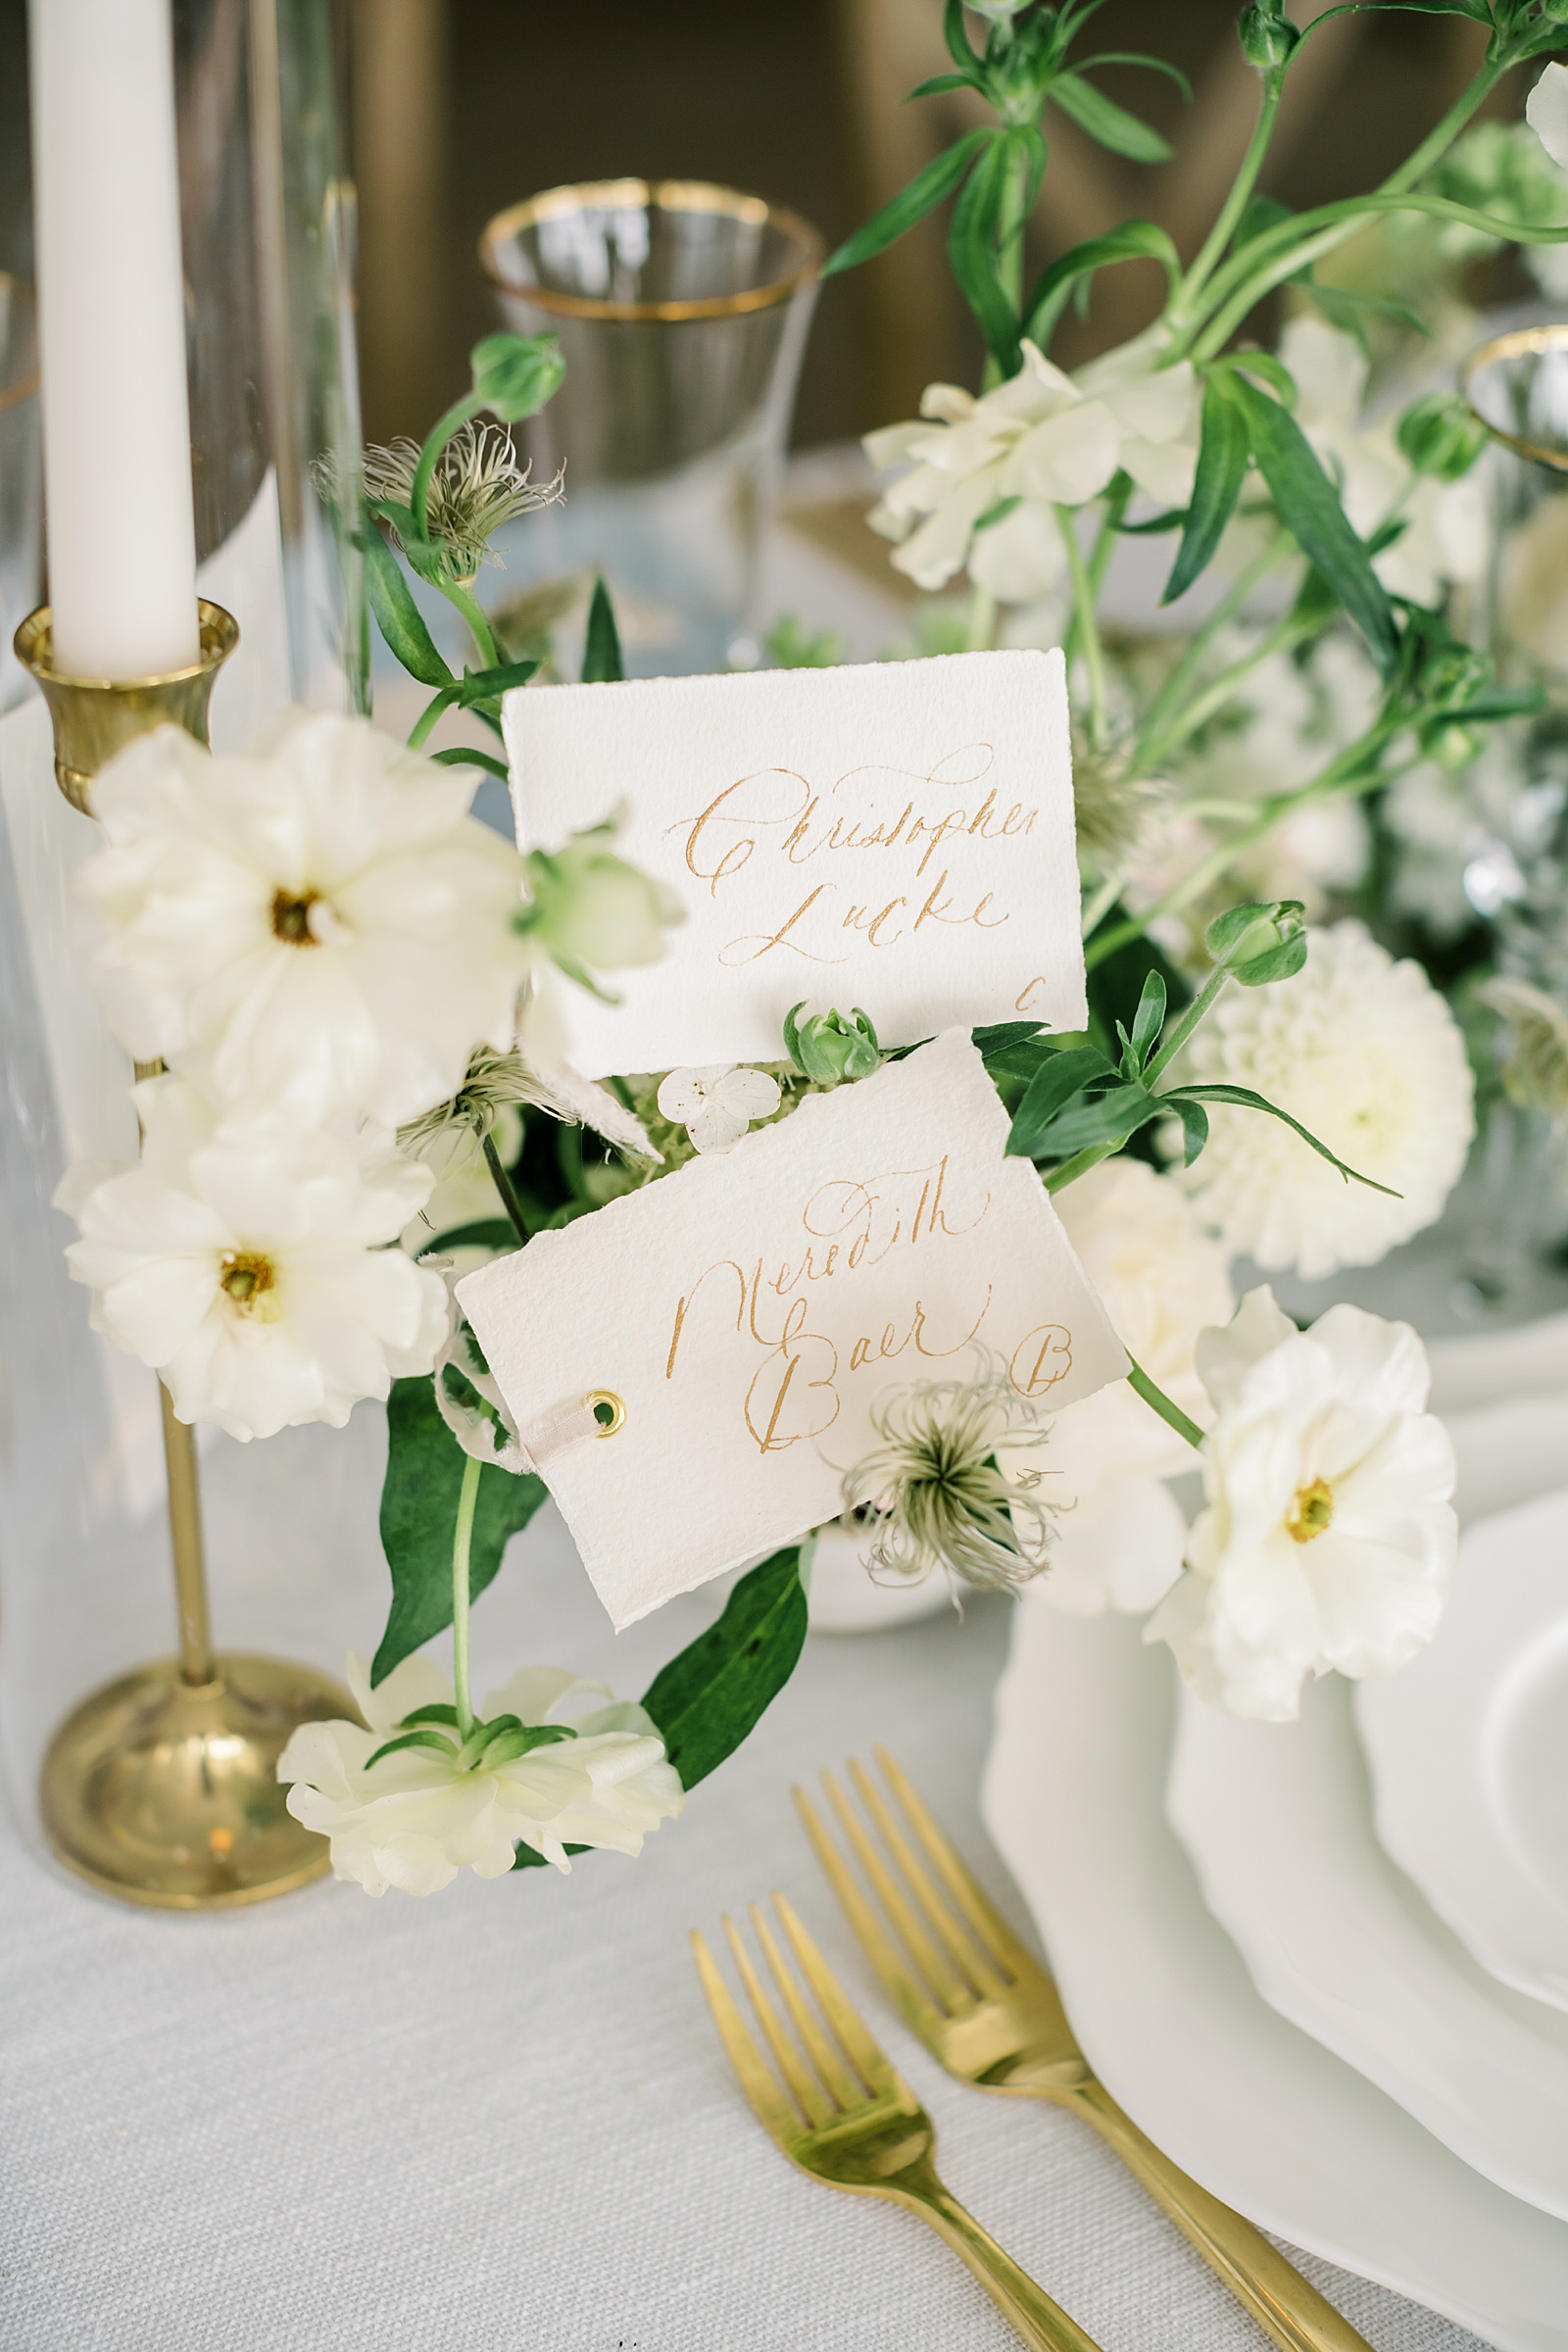 Place cards from Shasta Bell Calligraphy